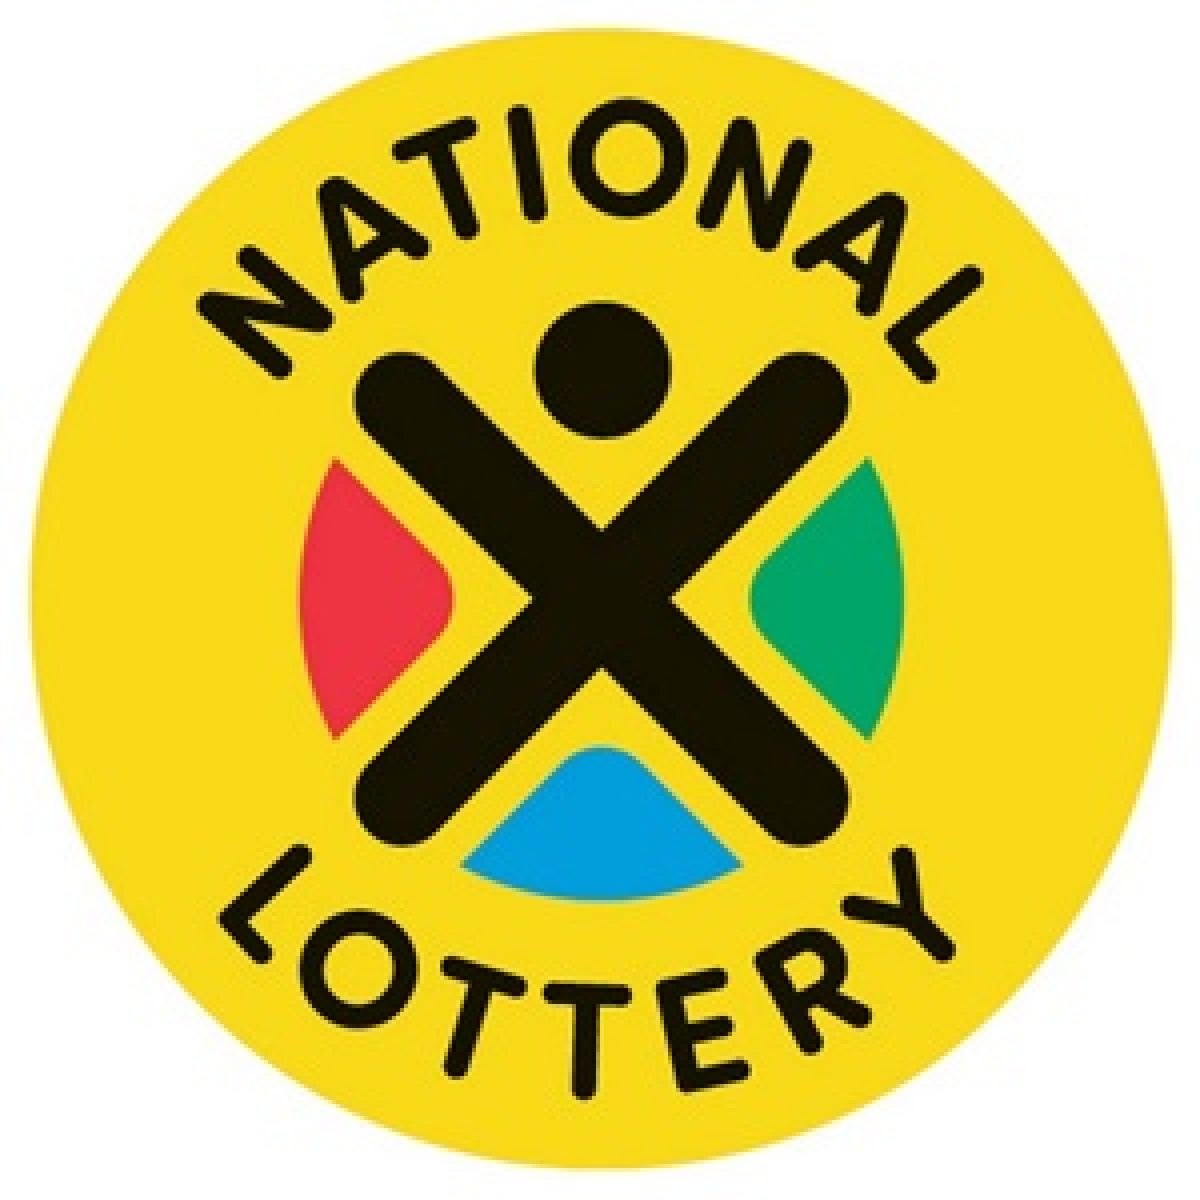 lotto and lotto plus results of yesterday